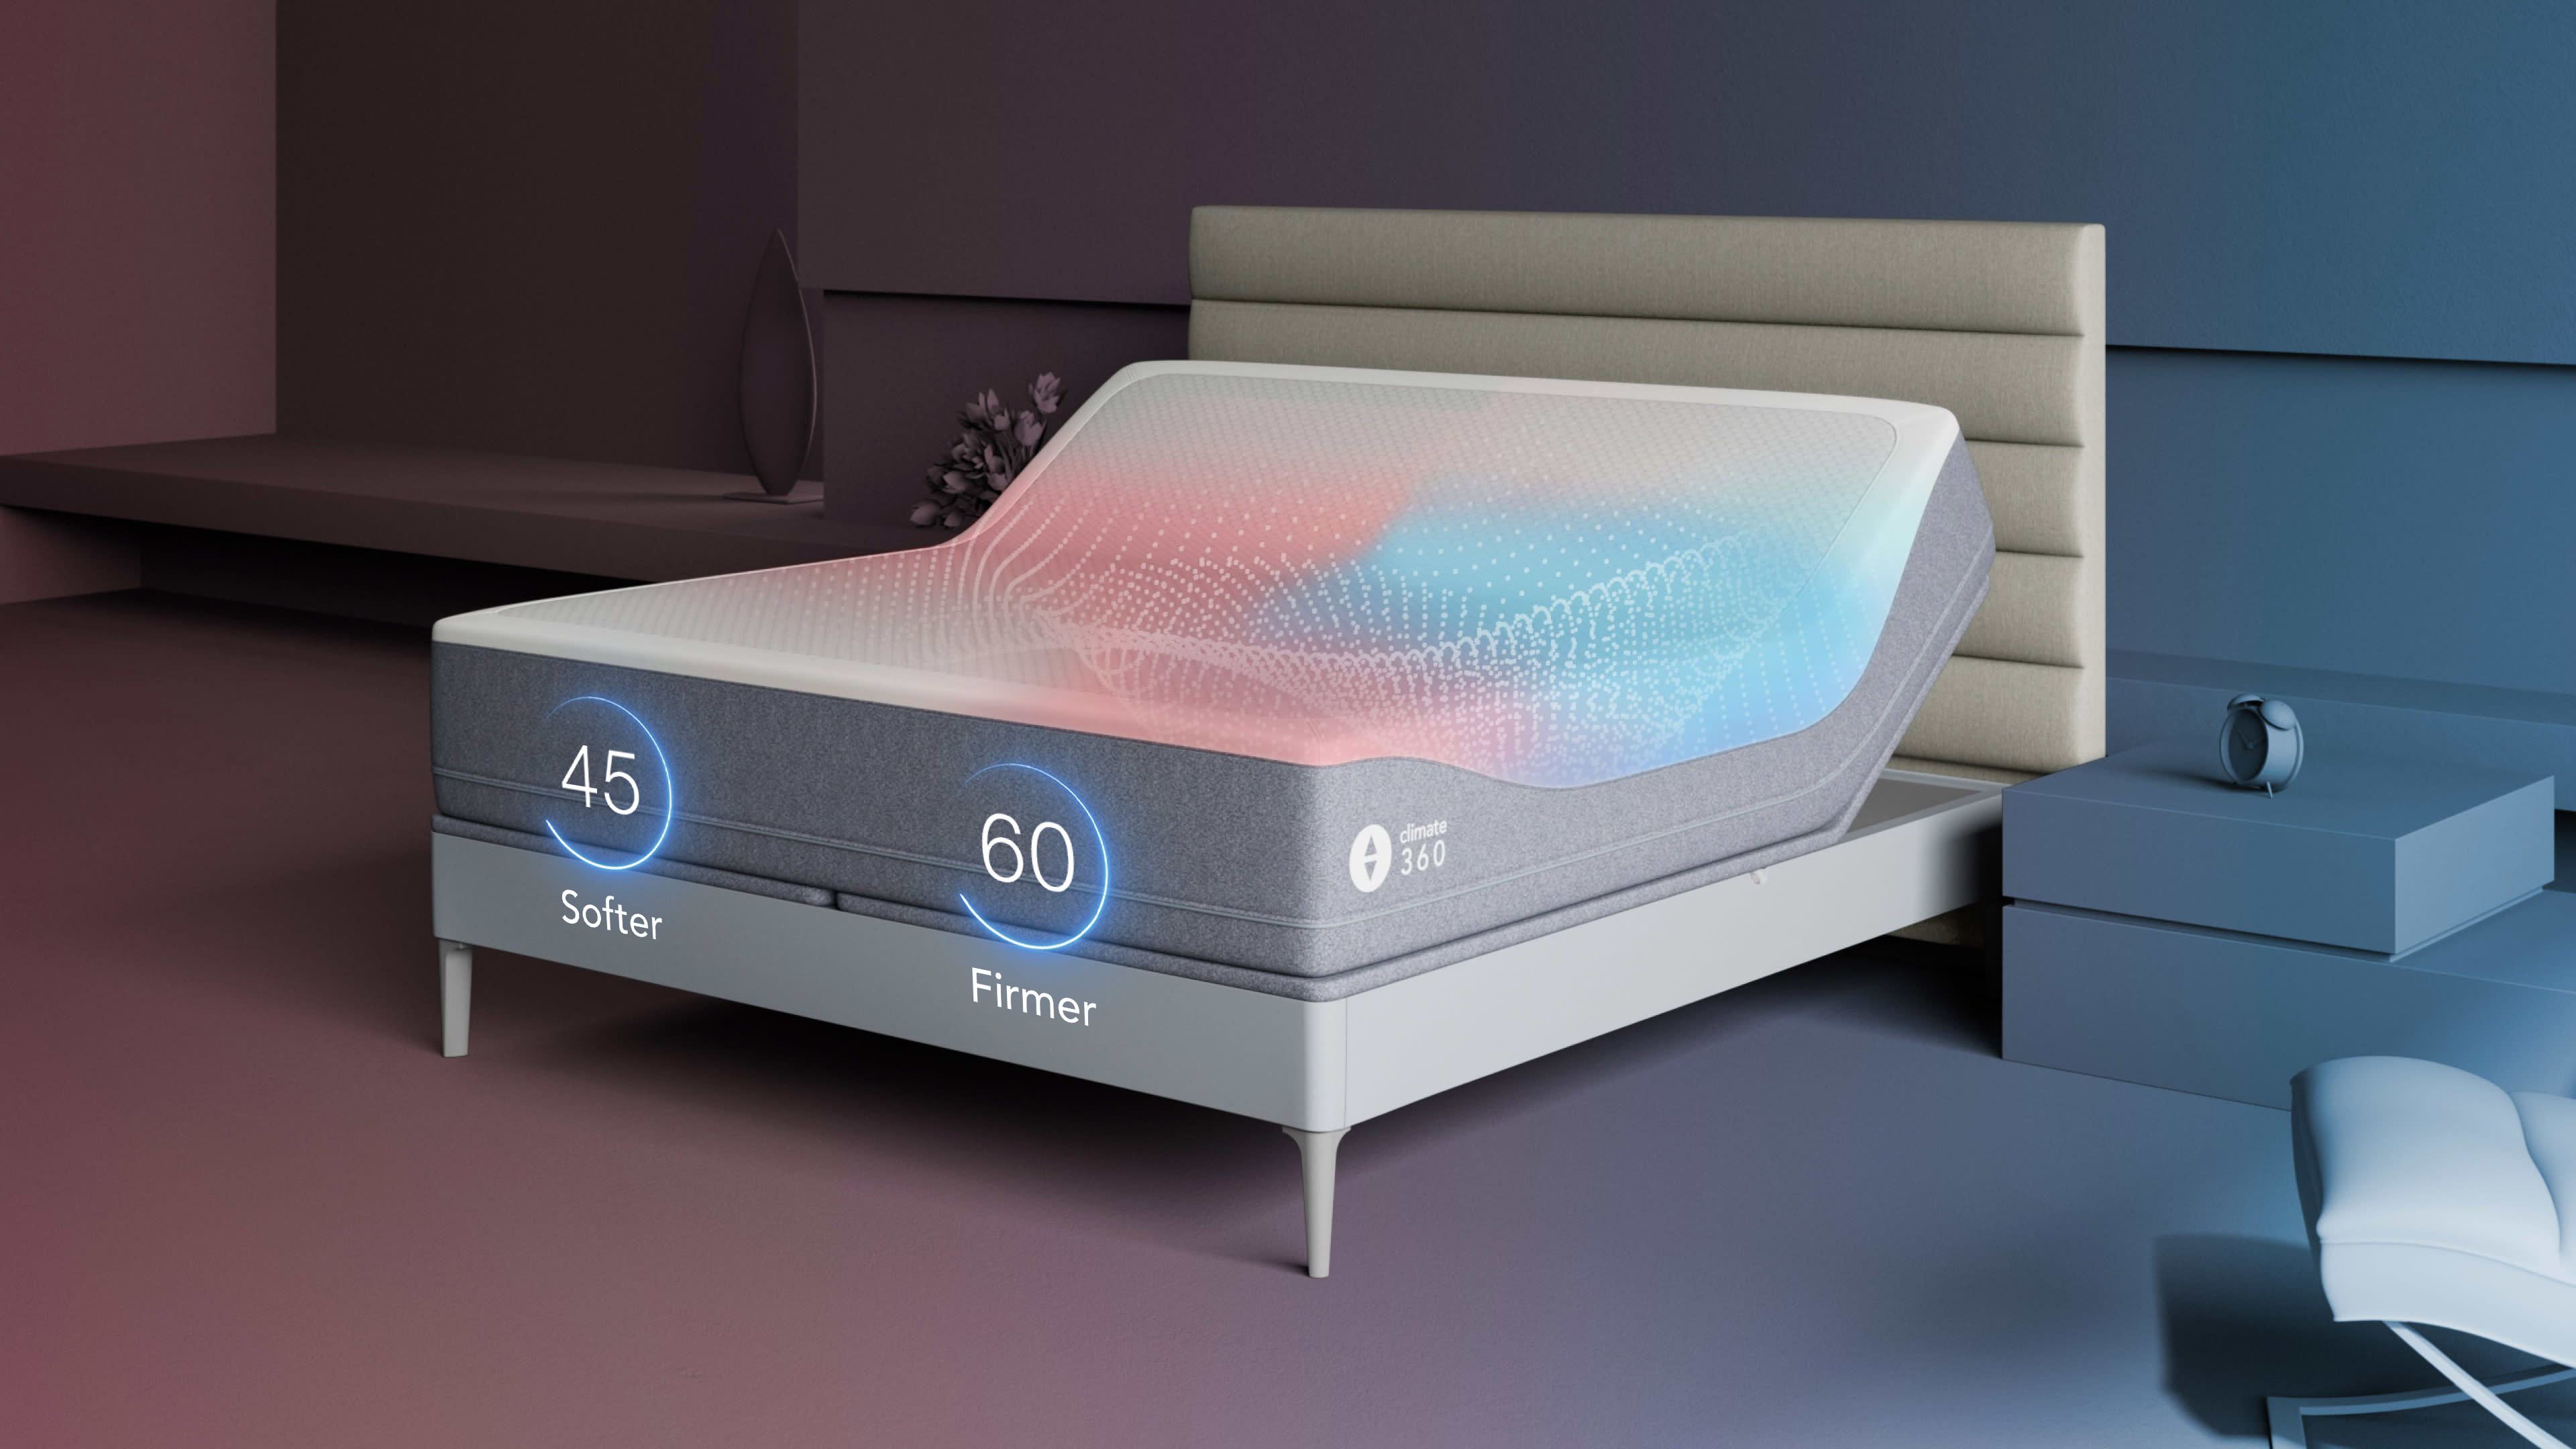 https://cdn.sleepnumber.com/image/upload/f_auto,q_auto:eco/v1704565366/workarea/catalog/product_images/climate360/Climate360_Gallery_45_Numbers